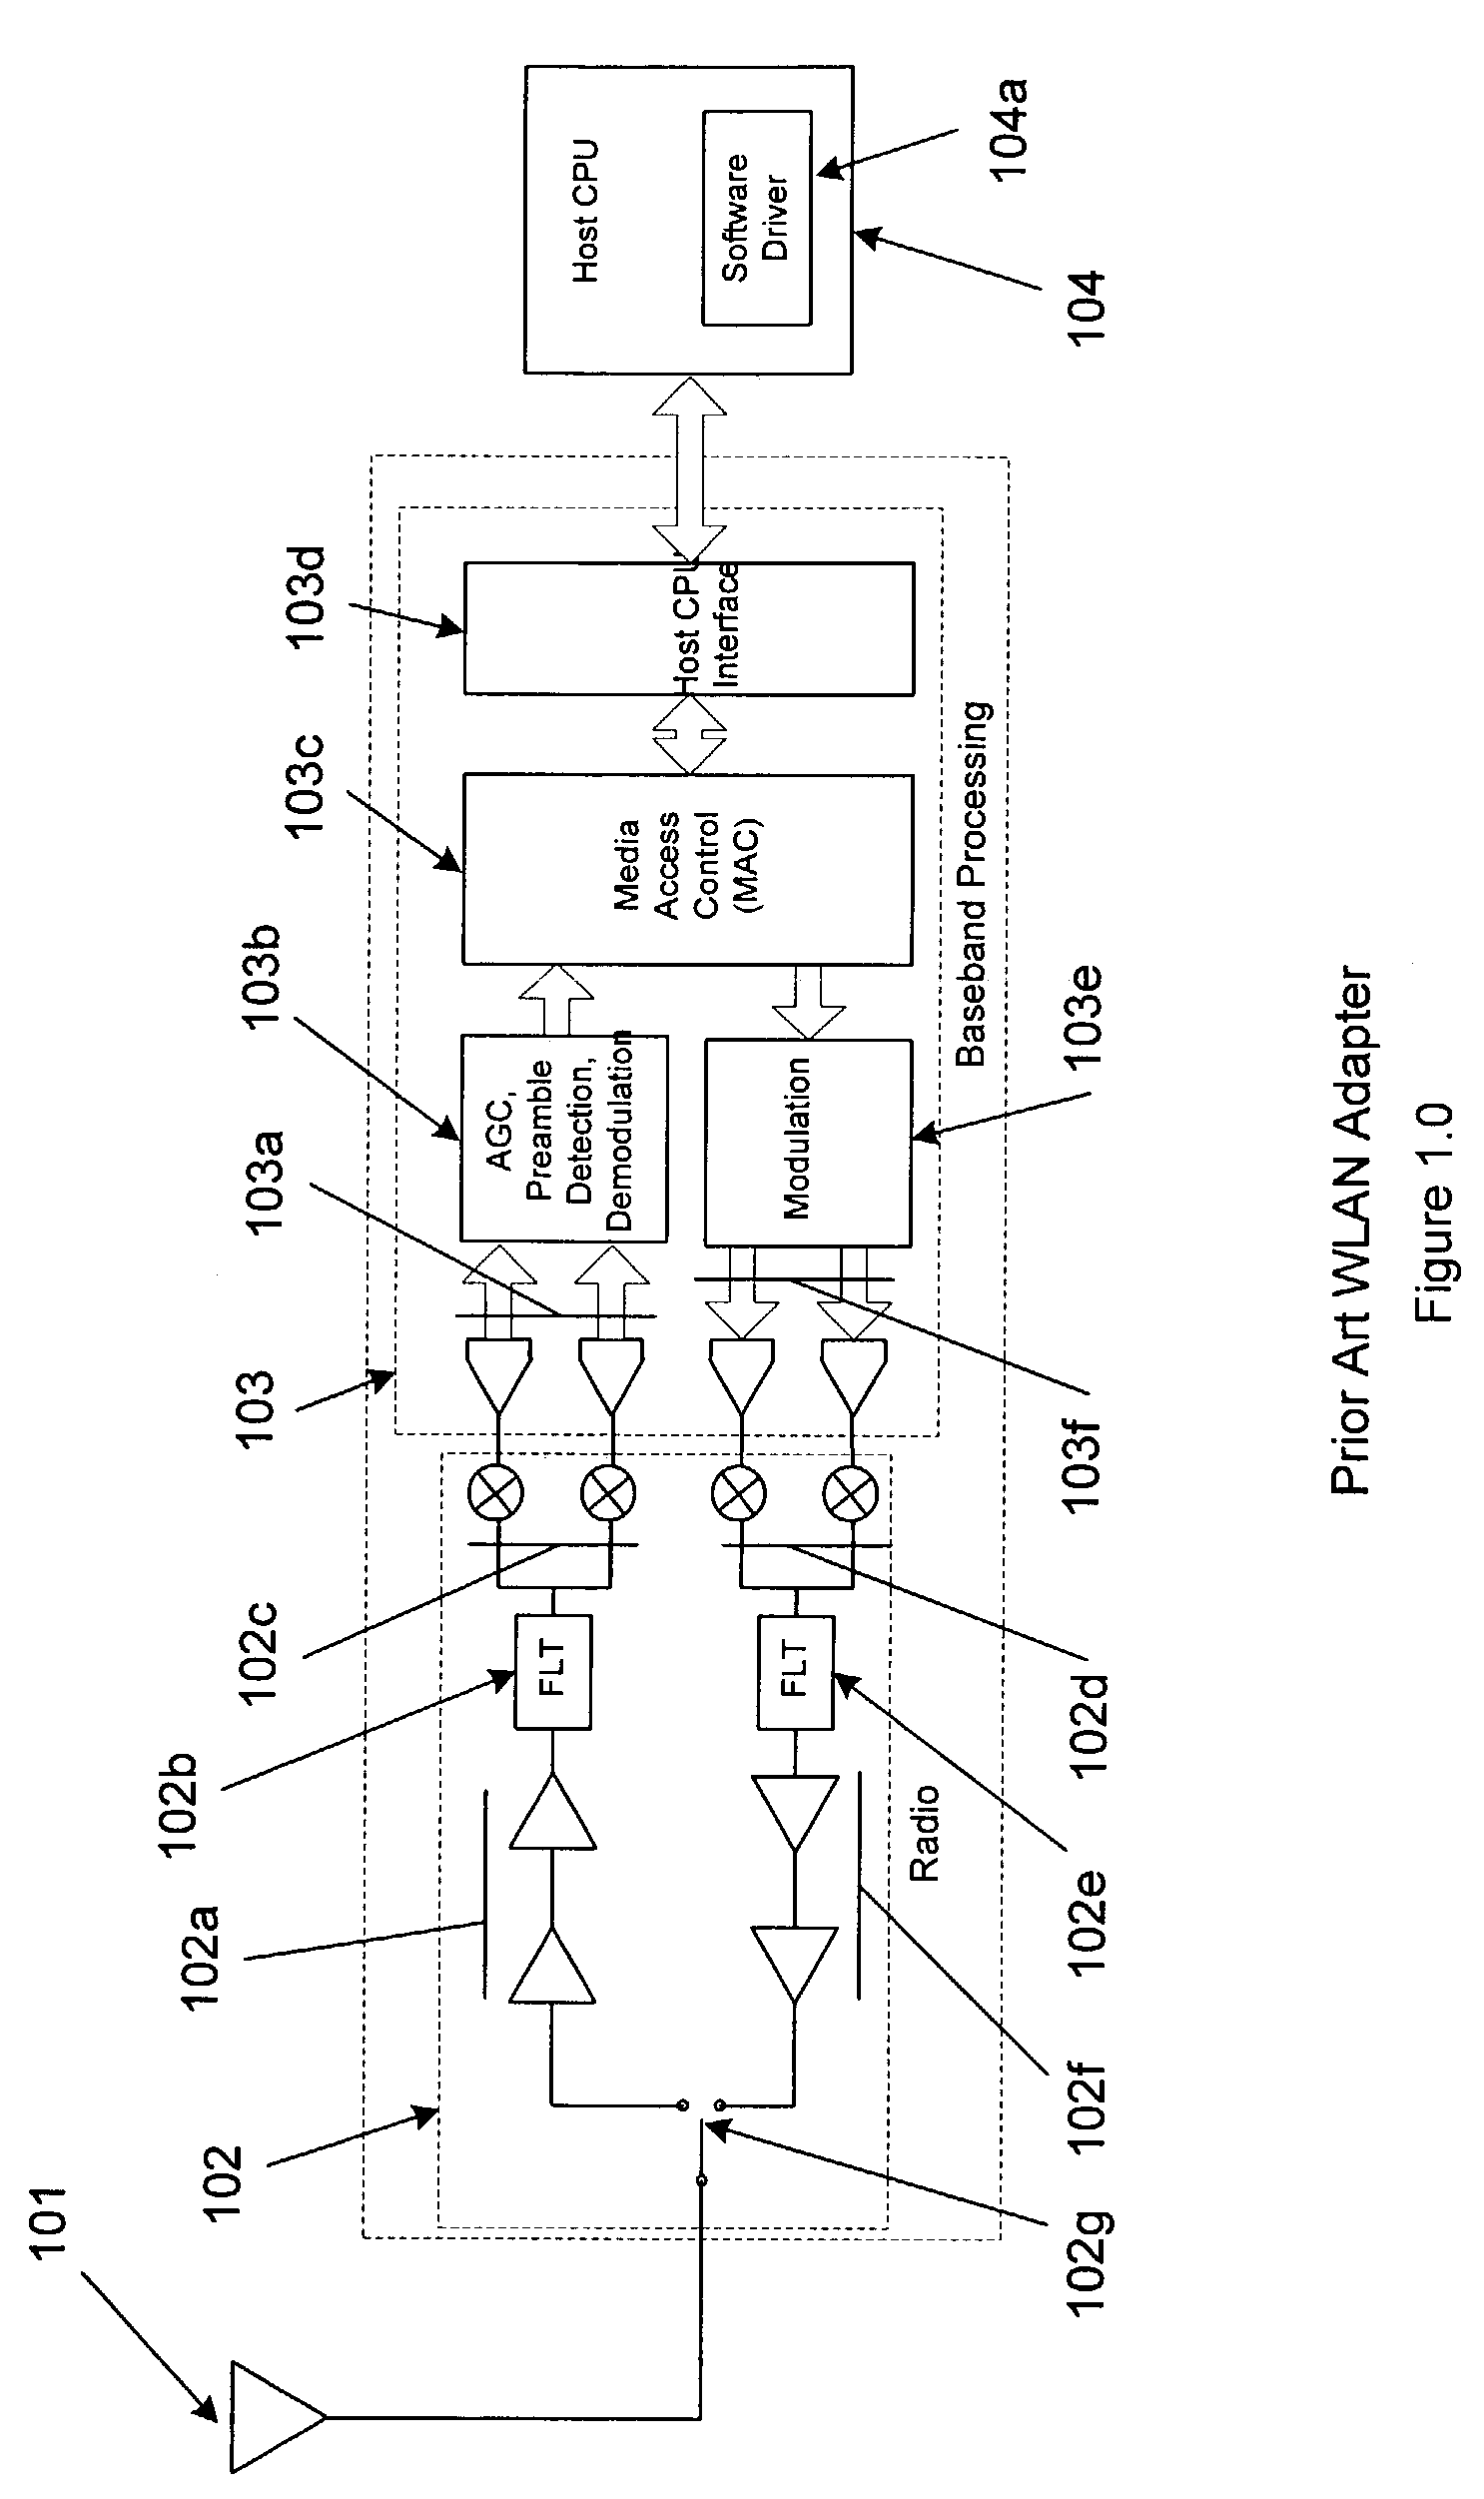 Method for minimizing time critical transmit processing for a personal computer implementation of a wireless local area network adapter